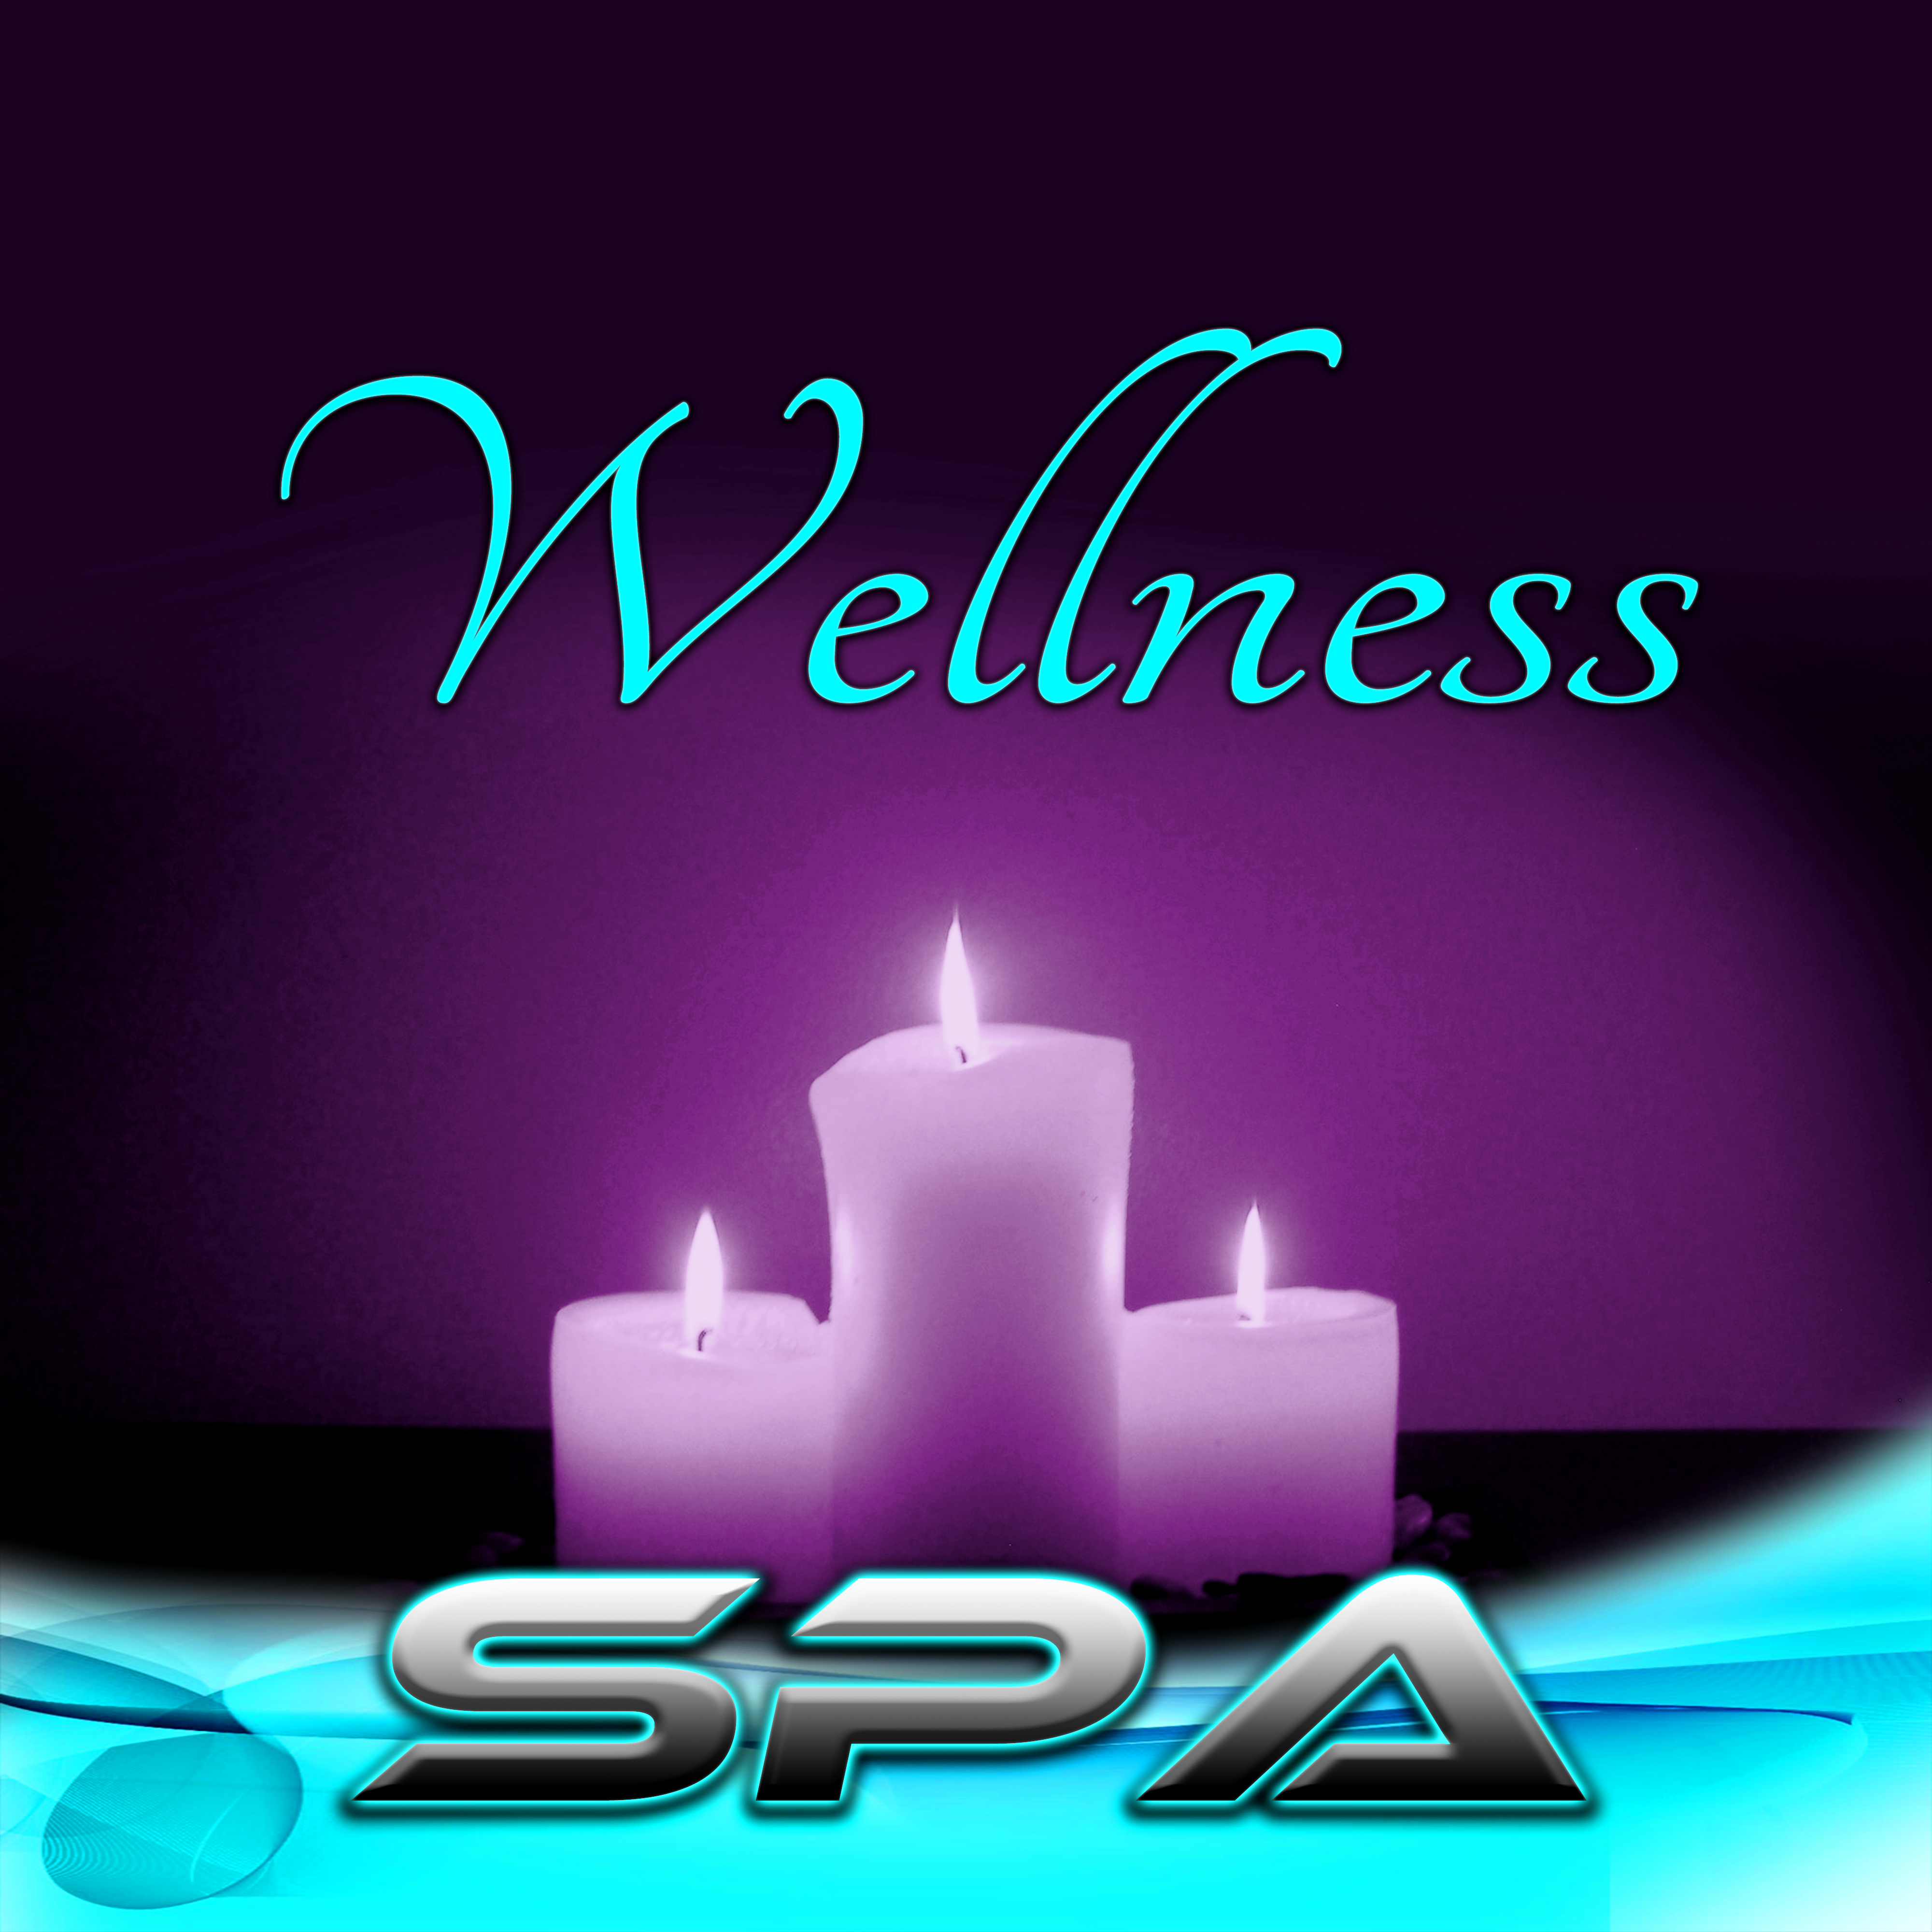 Wellness Spa - Ultimate Massage Relaxation, Music for Meditation, Relaxation, Massage Therapy, Pure Massage Music, Spa Music, Healing Hands